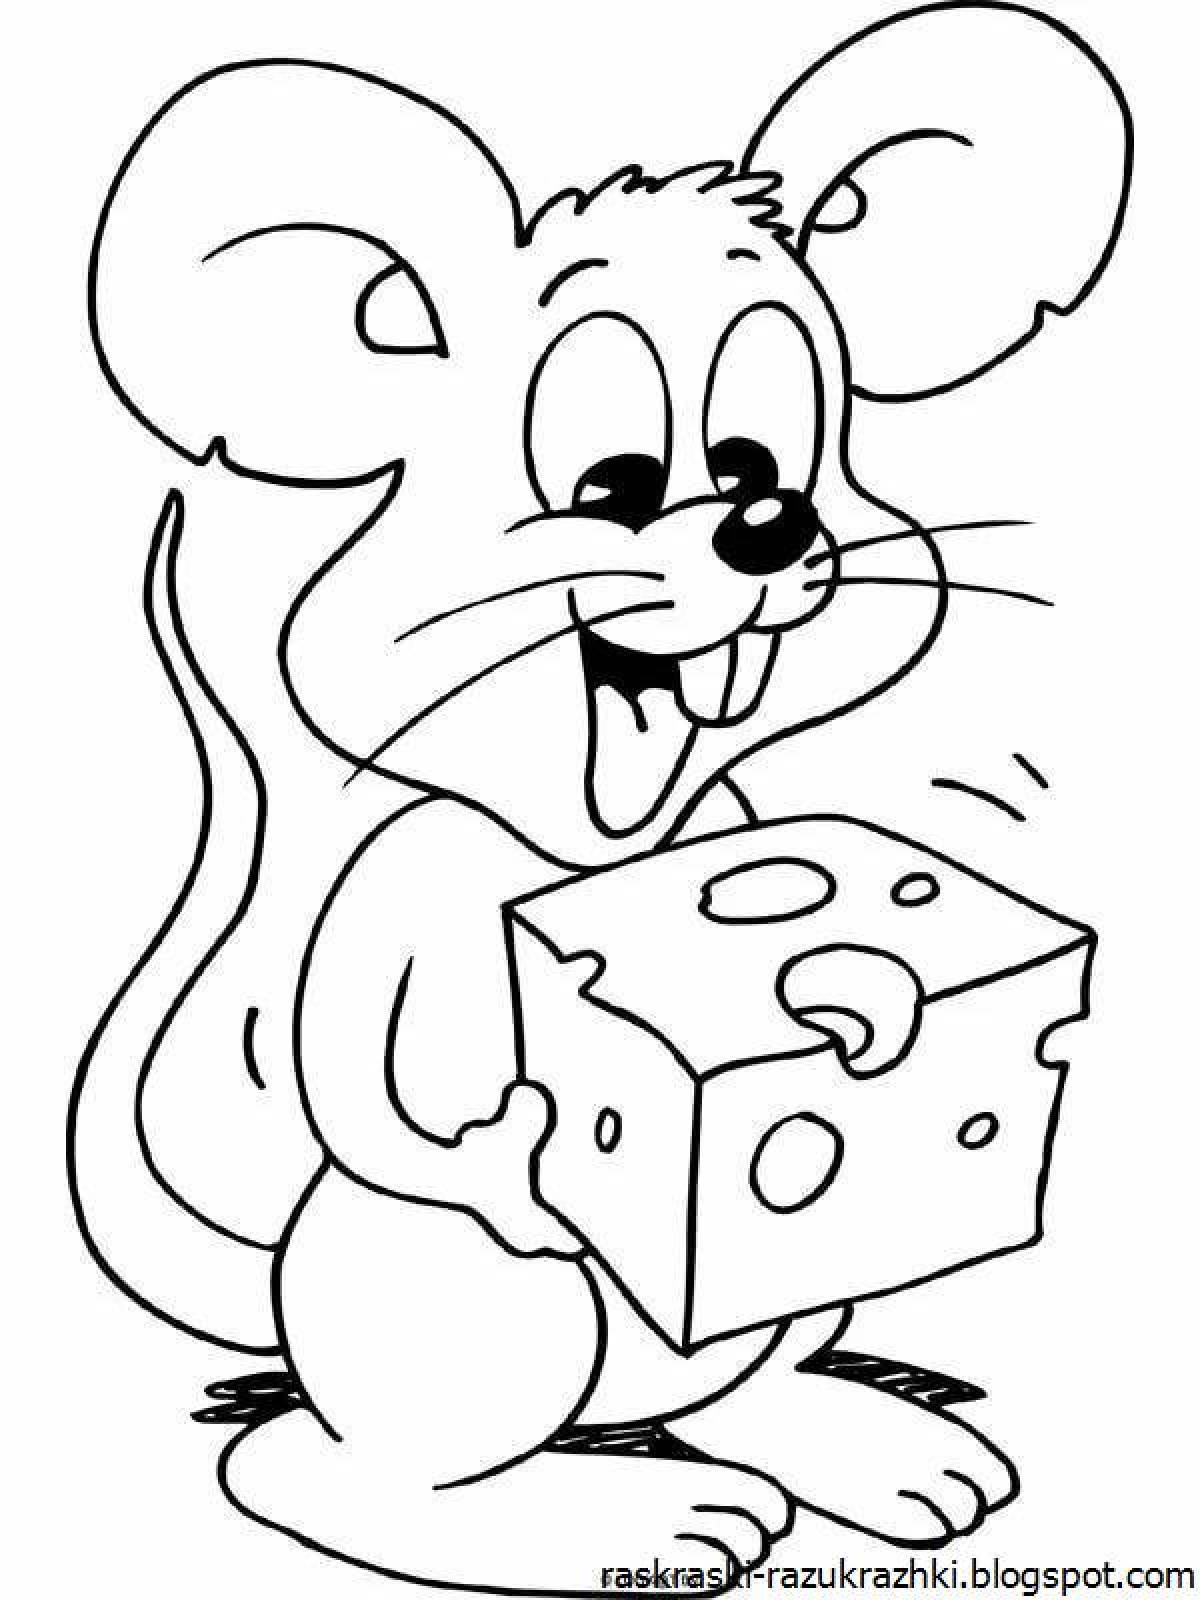 Incredible mouse coloring book